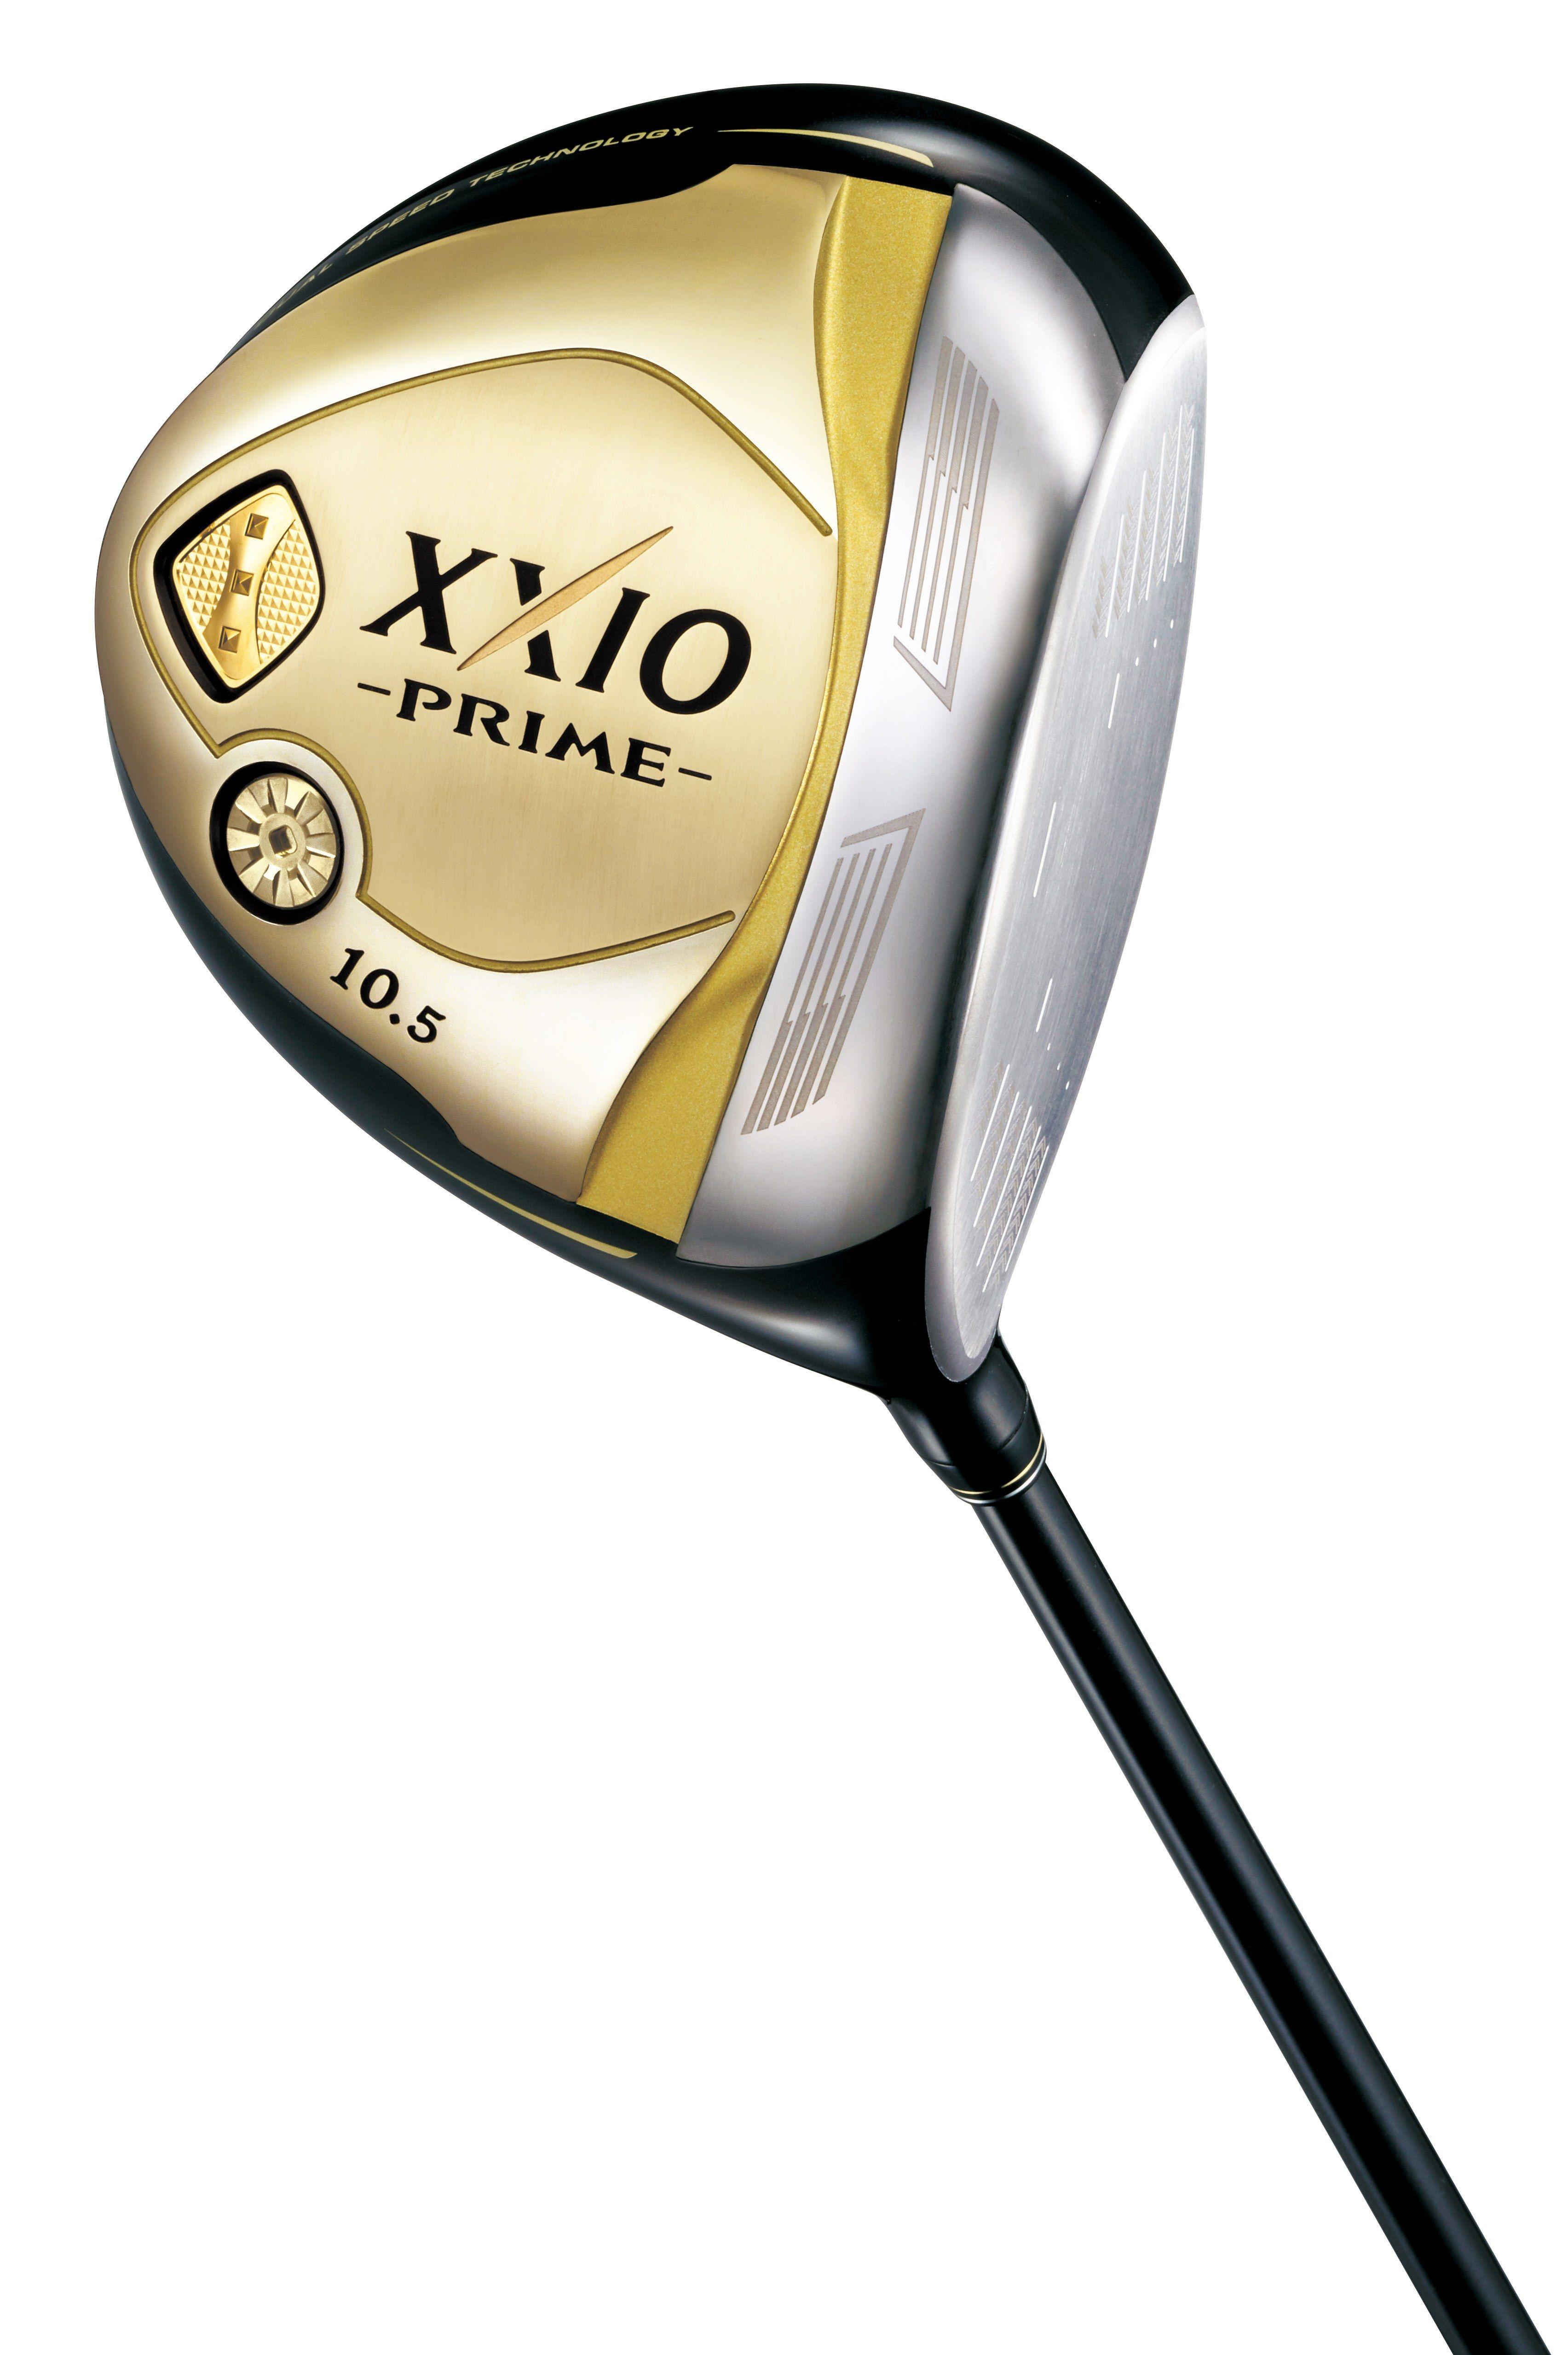 XXIO Golf Logo - XXIO pushes the extremes to help the average golfer swing faster ...